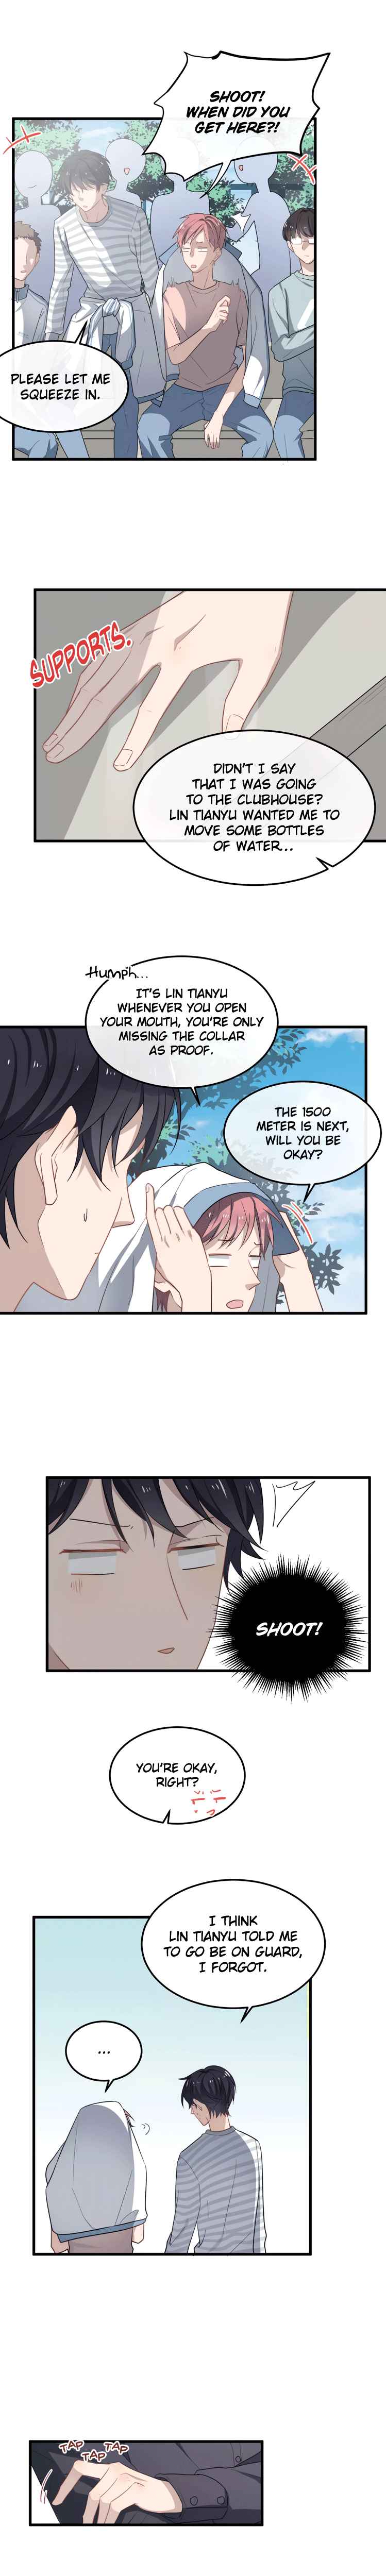 Too Close Ch. 14 Unexpected Concern